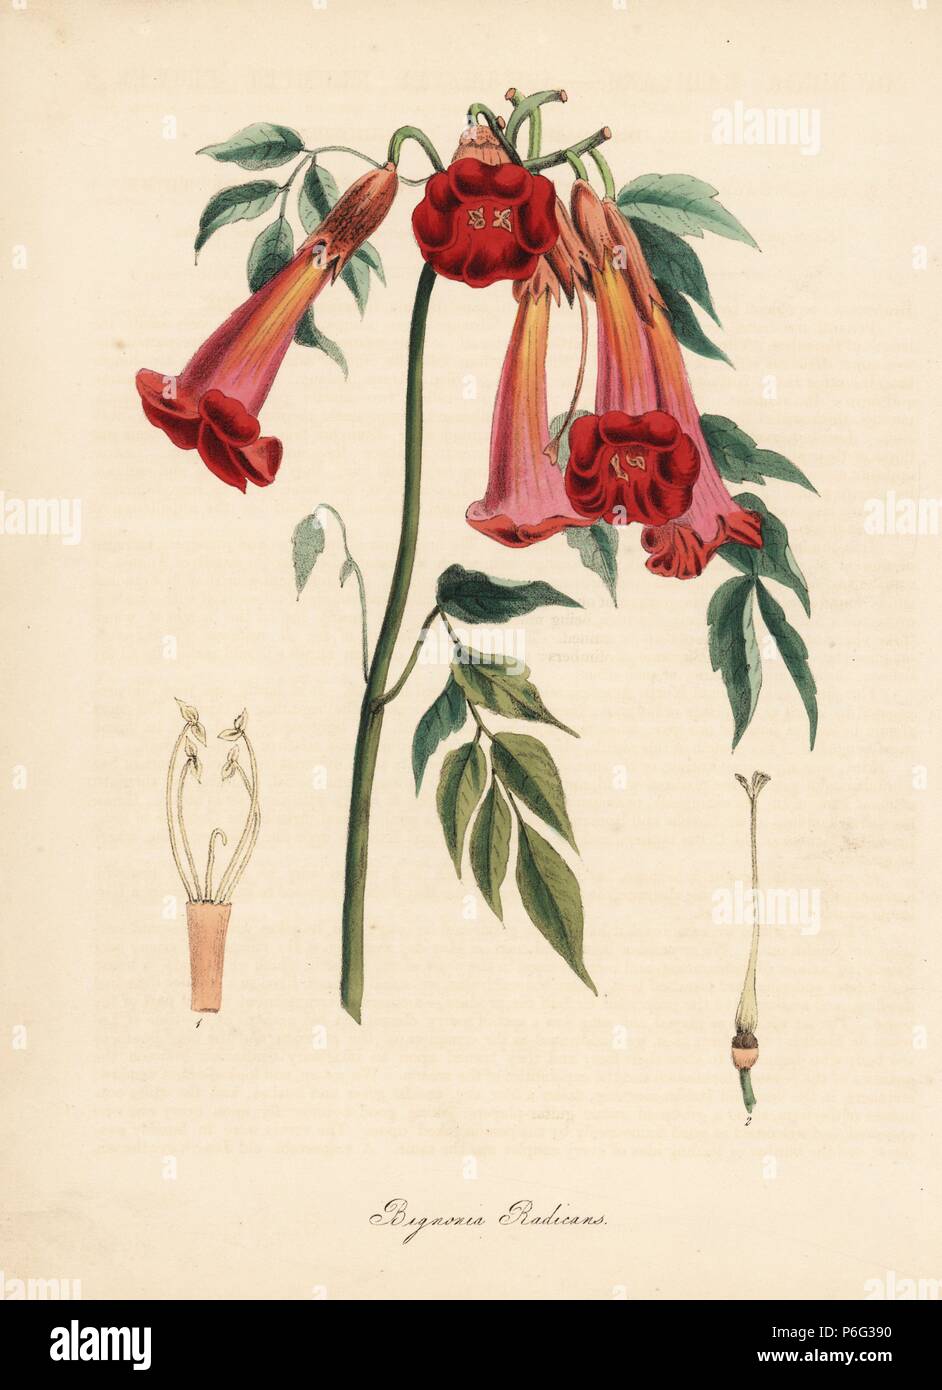 Trumpet vine or trumpet creeper, Campsis radicans (ash-leaved trumpet flower, Bignonia radicans). Taken from William Clark's illustration in Richard Morris's 'Flora Conspicua.' Handcoloured zincograph by C. Chabot drawn by Miss M. A. Burnett from her 'Plantae Utiliores: or Illustrations of Useful Plants,' Whittaker, London, 1842. Miss Burnett drew the botanical illustrations, but the text was chiefly by her late brother, British botanist Gilbert Thomas Burnett (1800-1835). Stock Photo